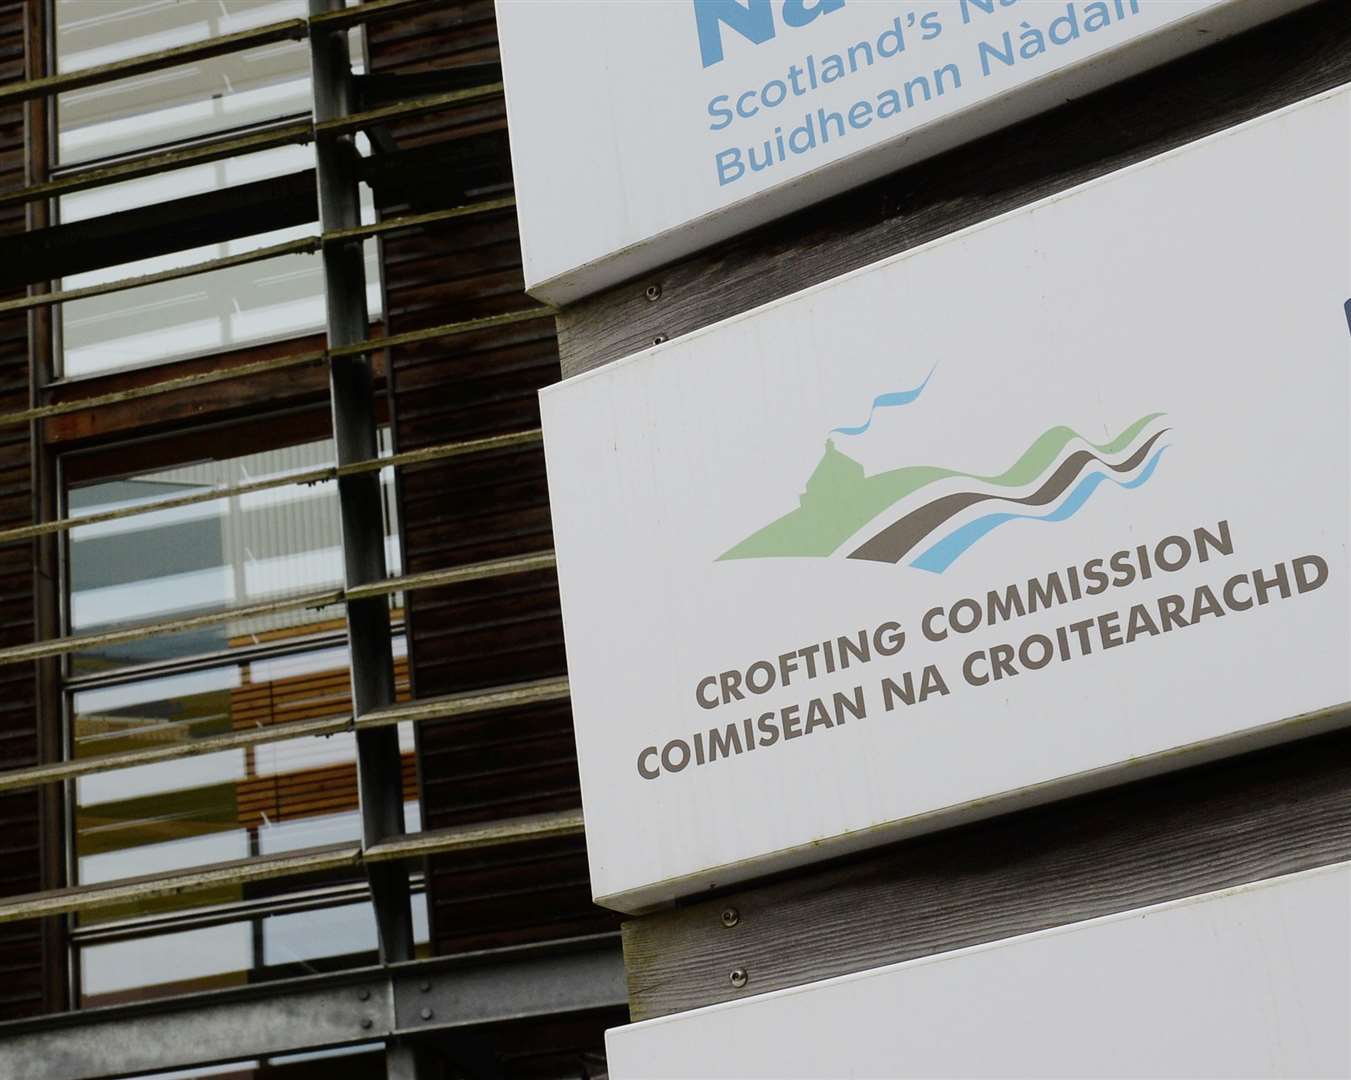 The Crofting Commission is calling for crofters' details to be checked.